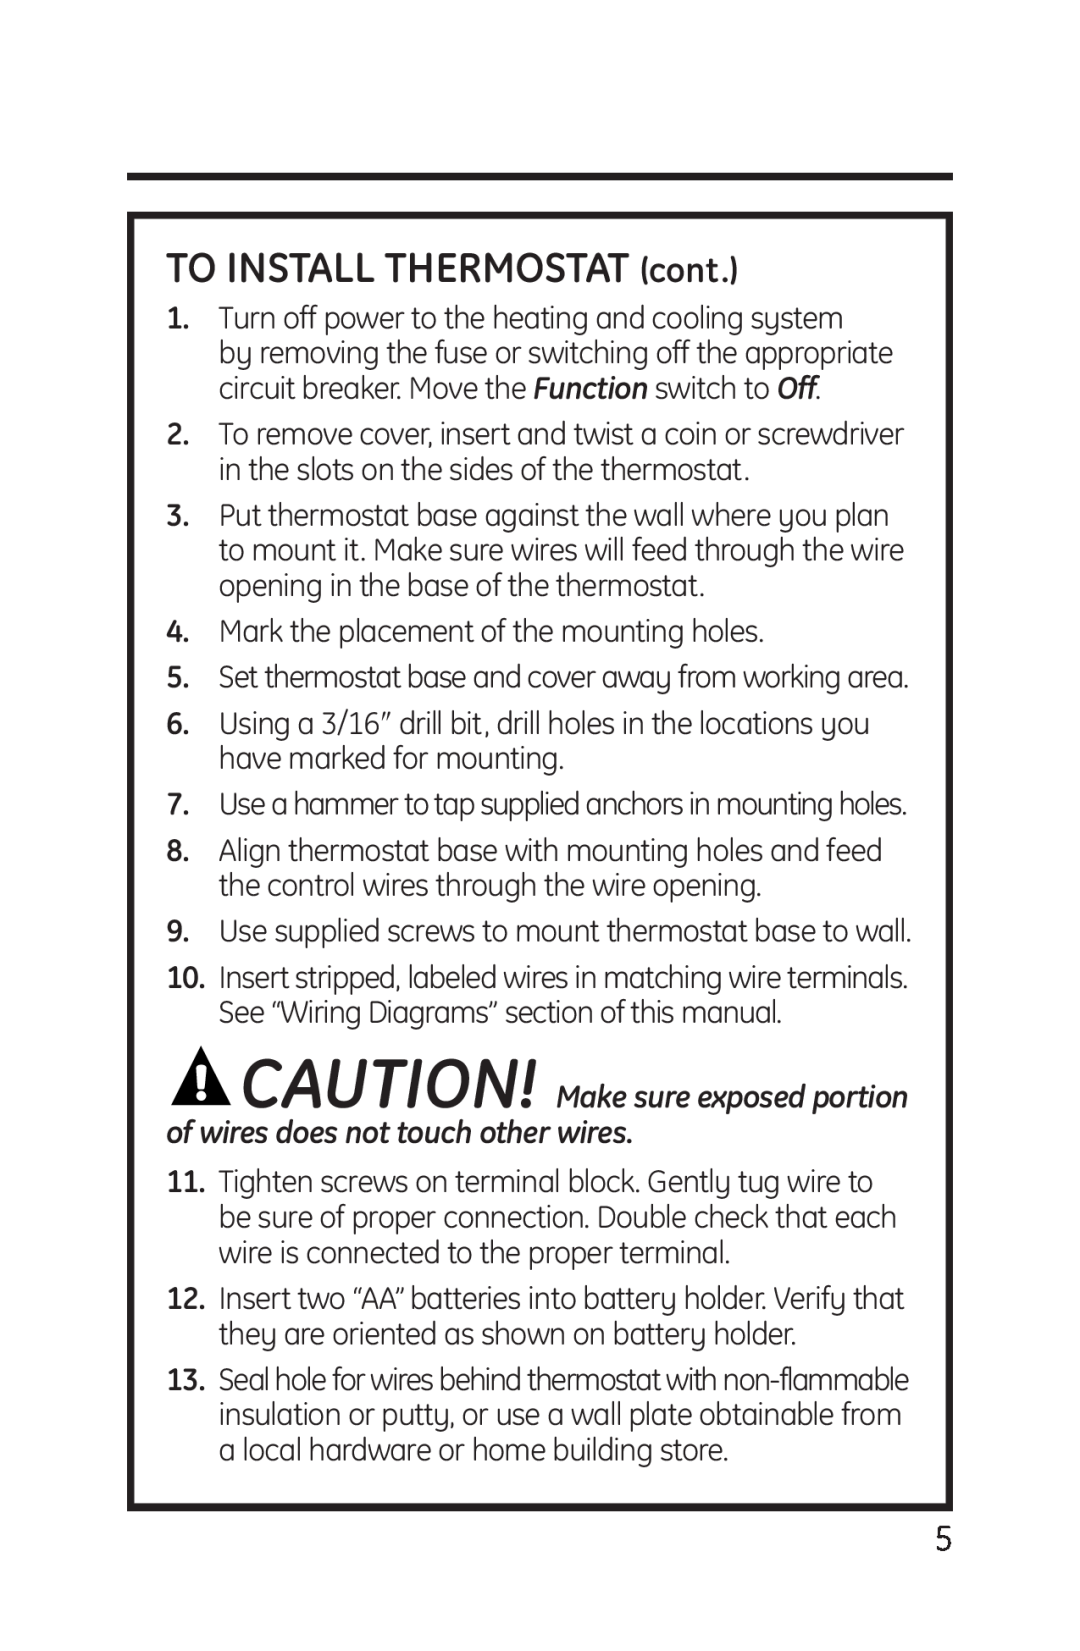 GE RAK148P1, RAK164P1 installation instructions TO INSTALL THERMOSTAT cont, Turn off power to the heating and cooling system 